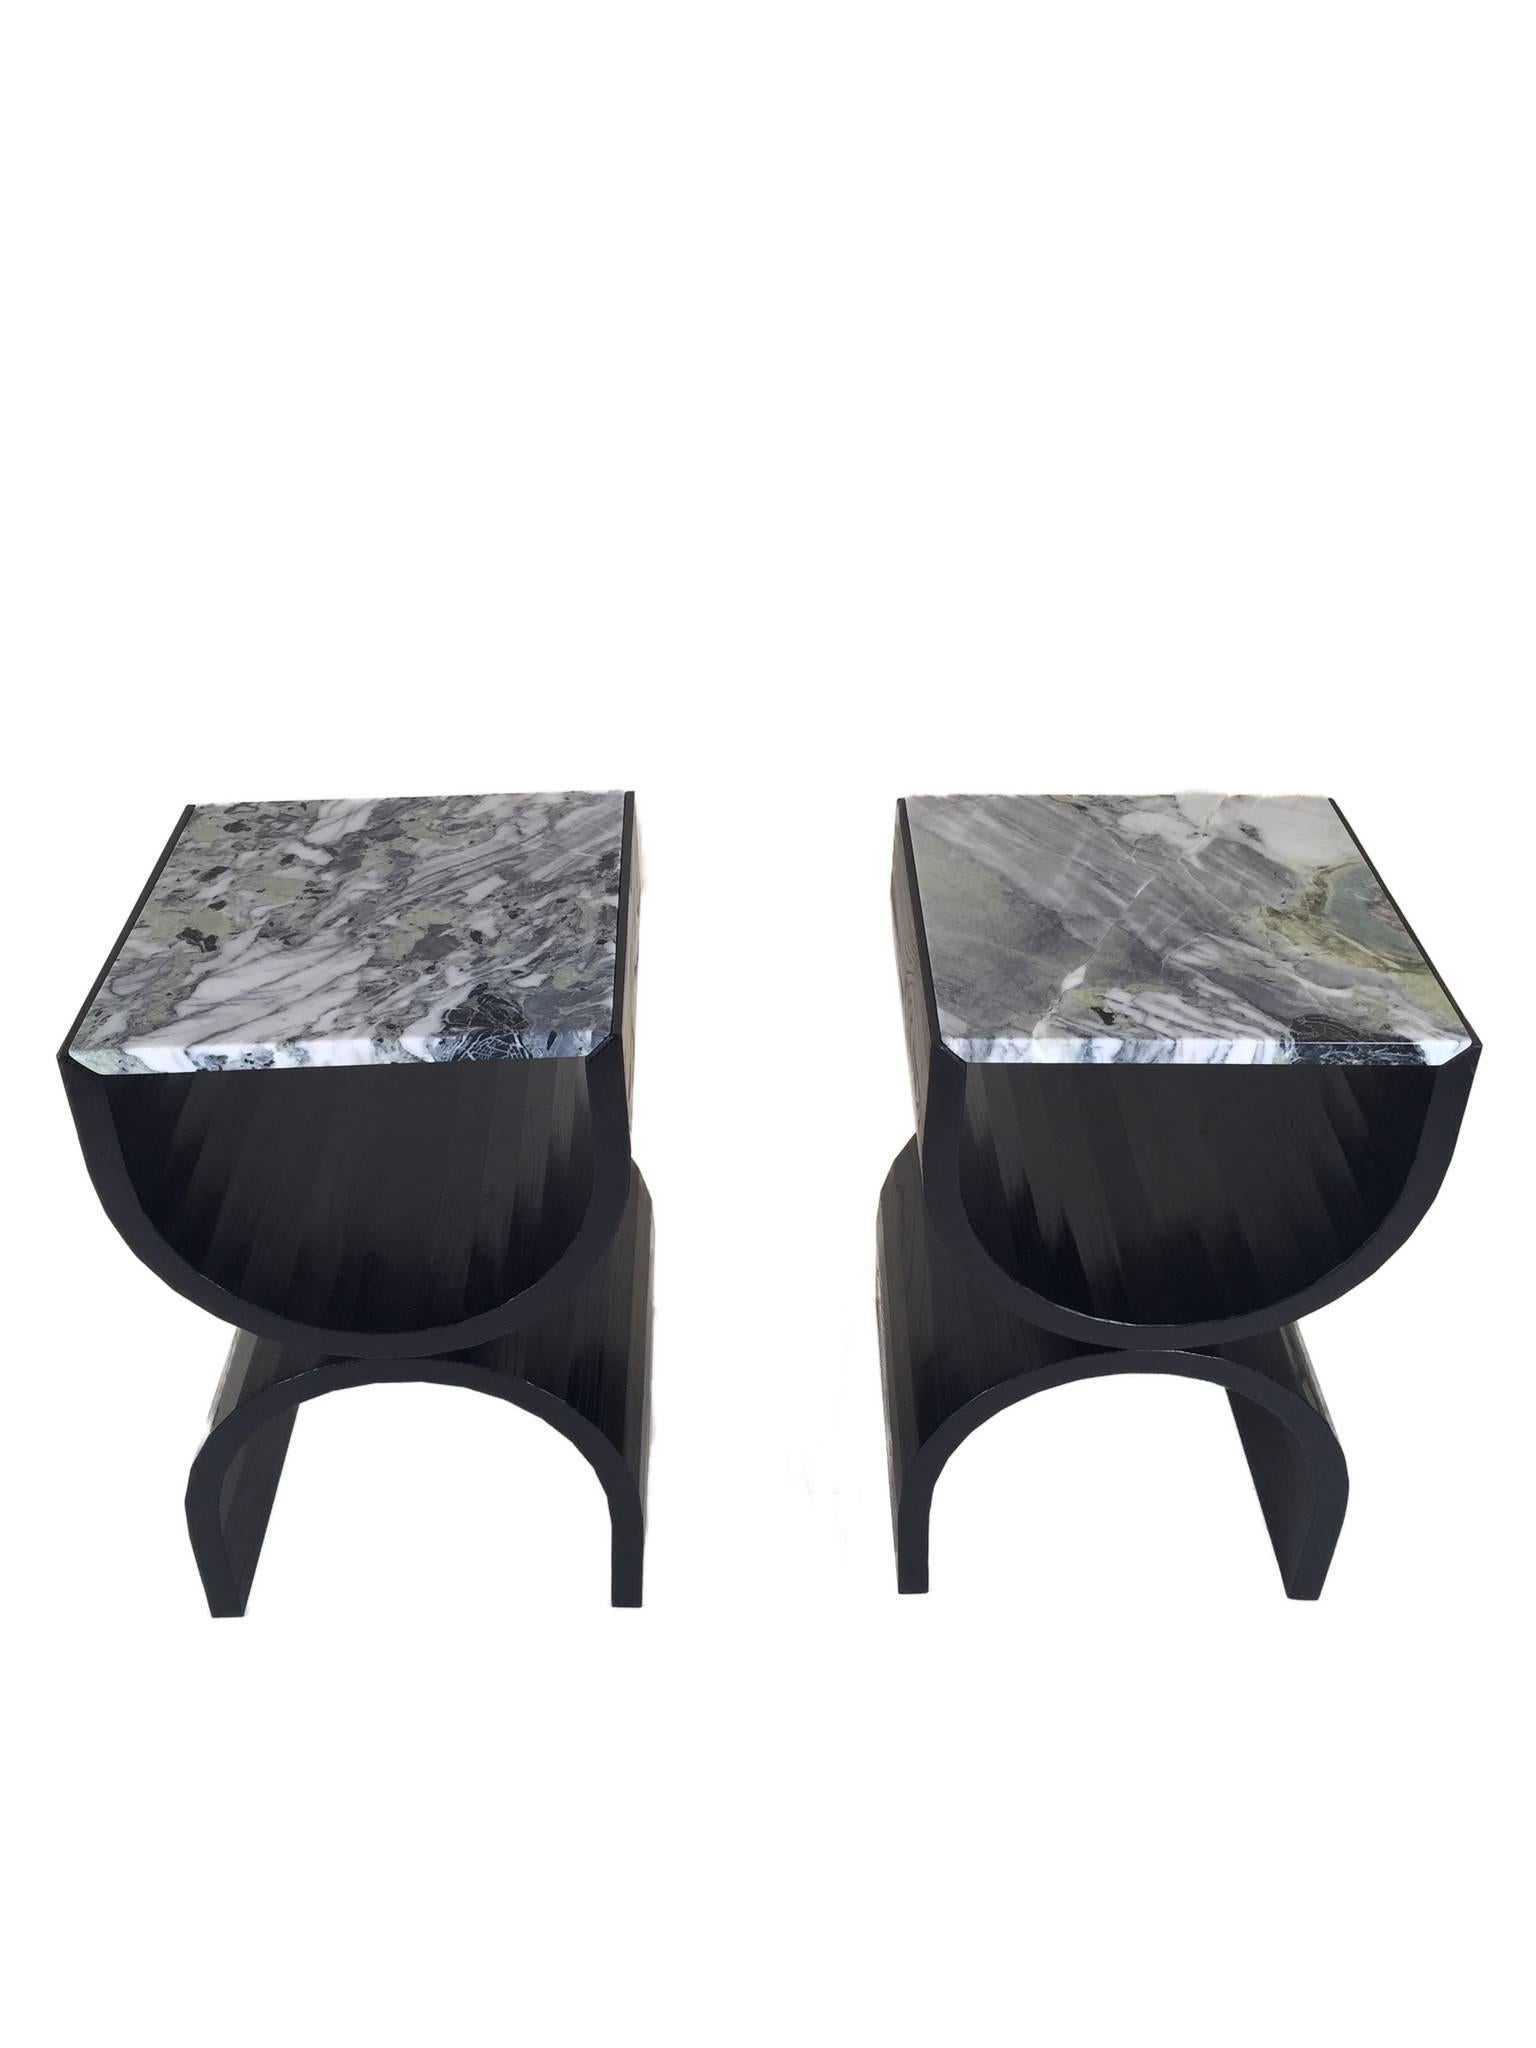 Bleached or ebonized ash or forms two gently faceted curves that cradle the marble tabletop. Each marble slab is hand selected and mitered to nest within the coopered frame. The solid wood curves feature grain matched detailing and a bold Art Deco